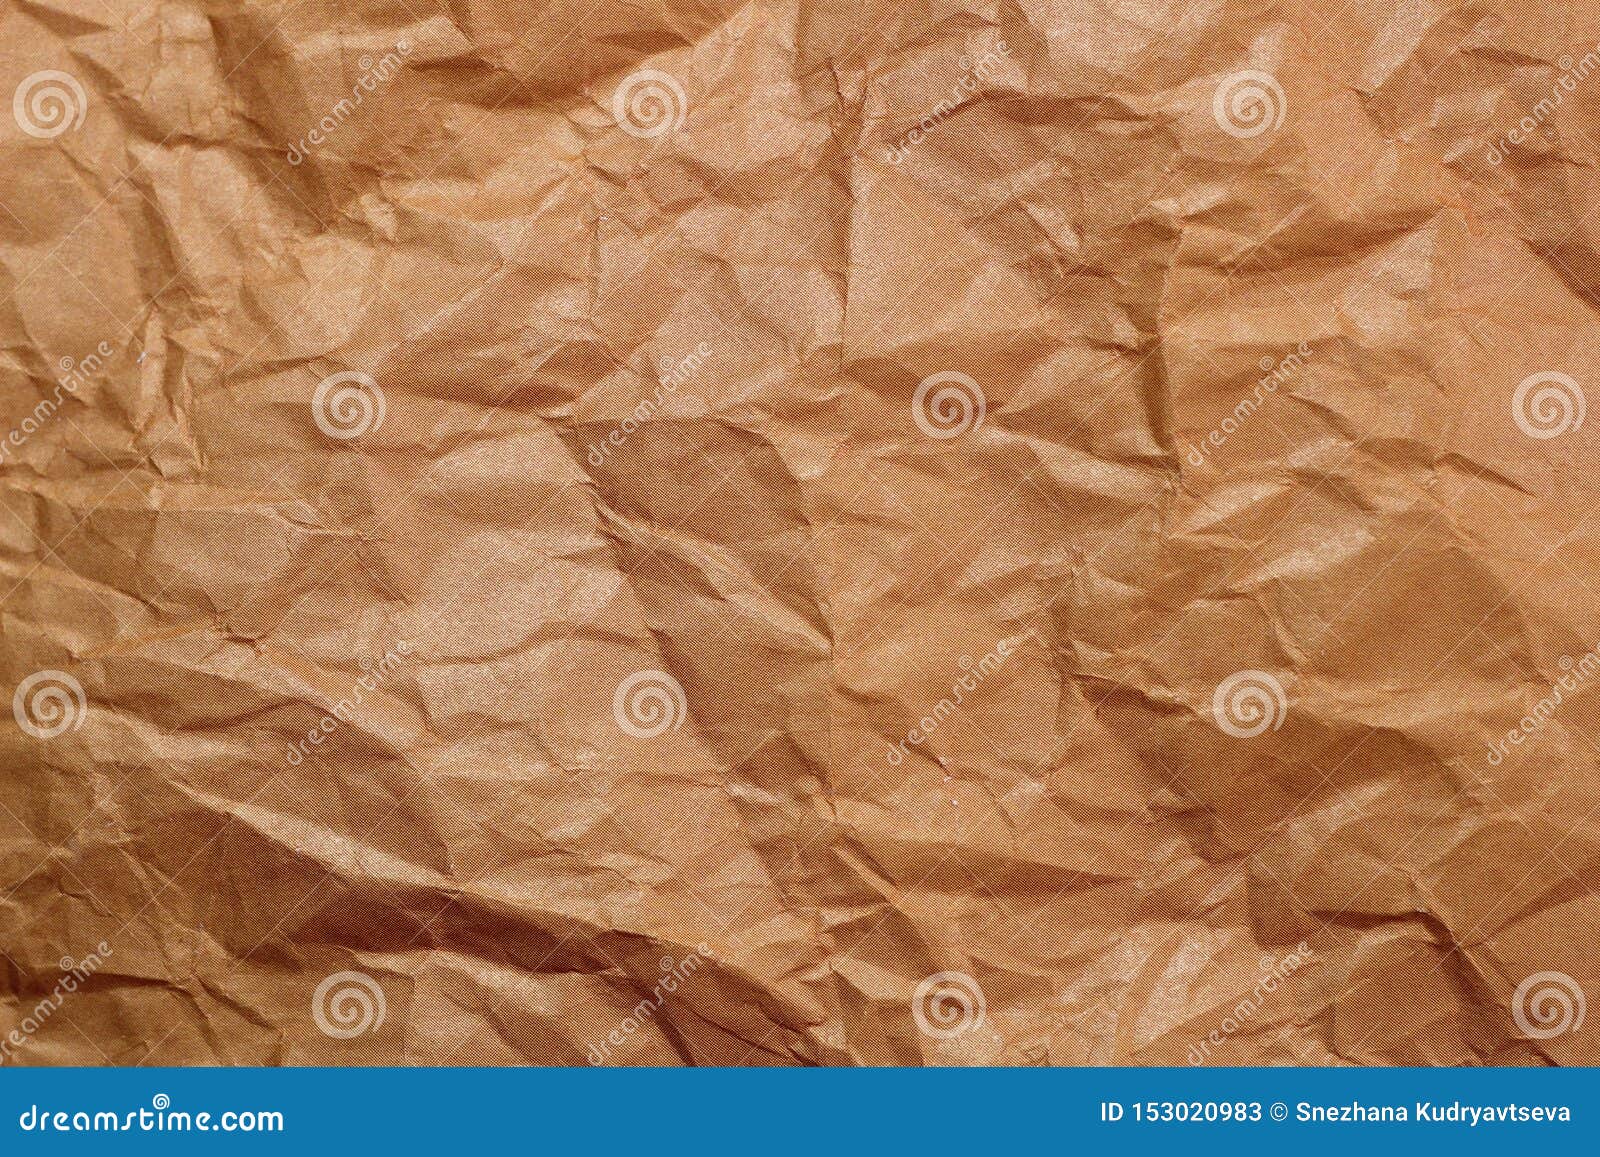 Detail of creased and wrinkled orange paper - Stock Image - F025